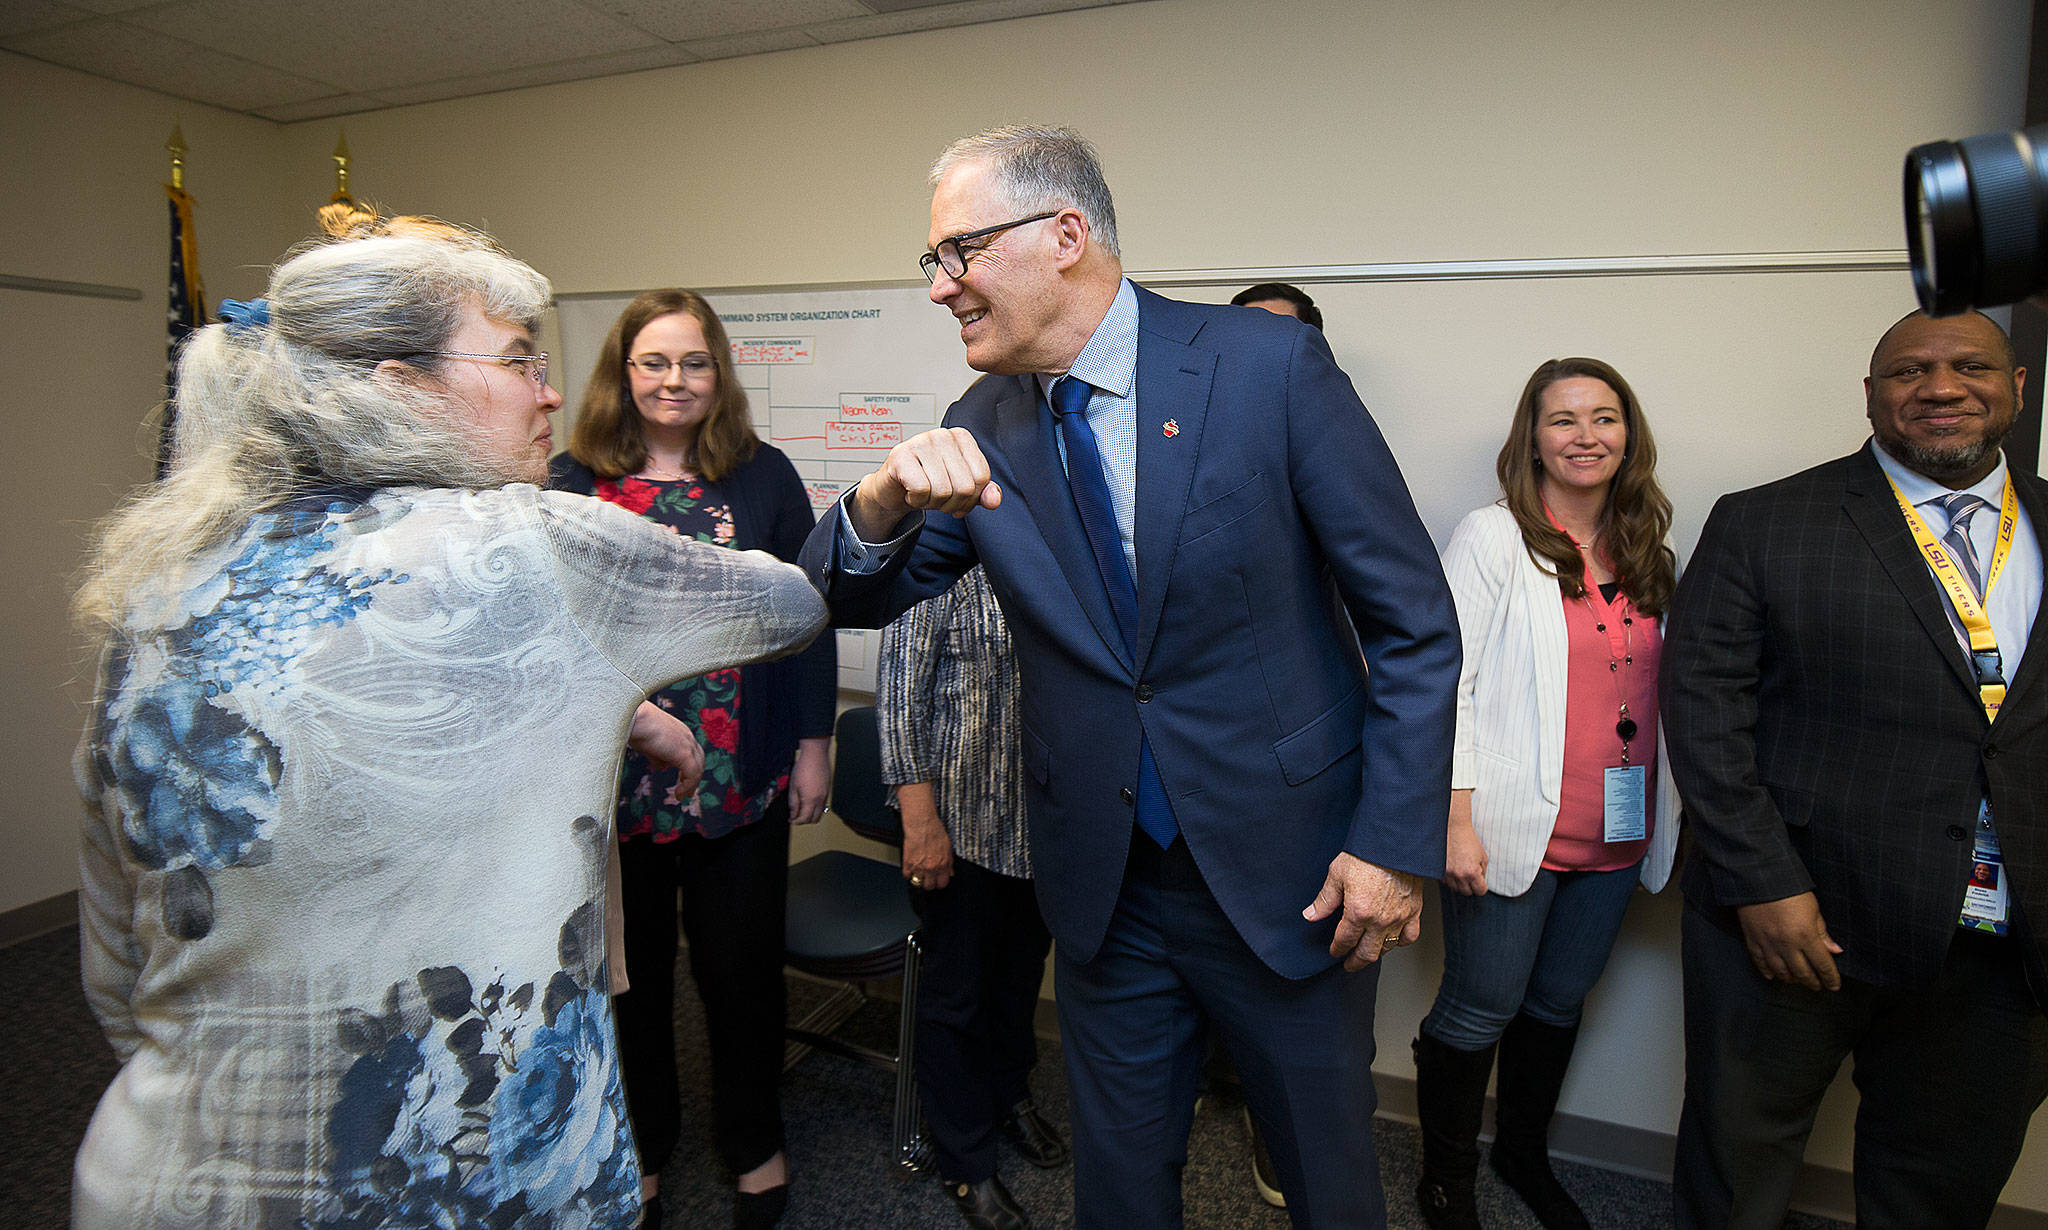 Governor Jay Inslee bumps elbows with staff before a group photo at the Snohomish Health District’s Incident Command Center on Friday in Everett. (Andy Bronson / The Herald)